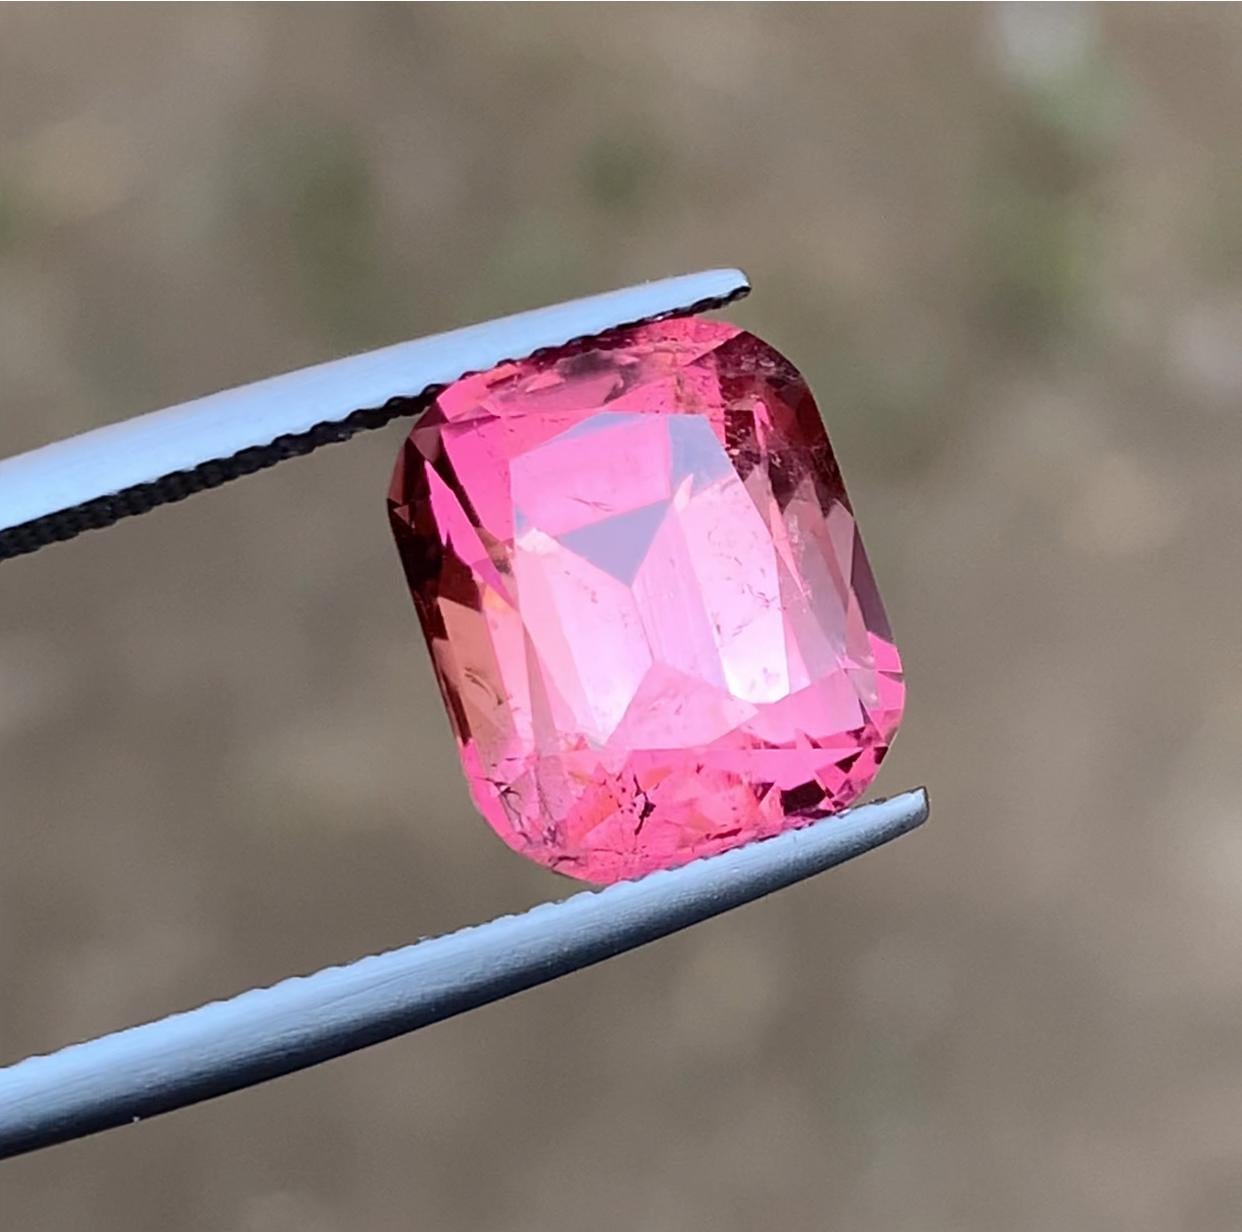 Contemporary Rare Peachy Pink Natural Tourmaline Gemstone, 7.25 Ct Cushion for Ring/Pendant For Sale